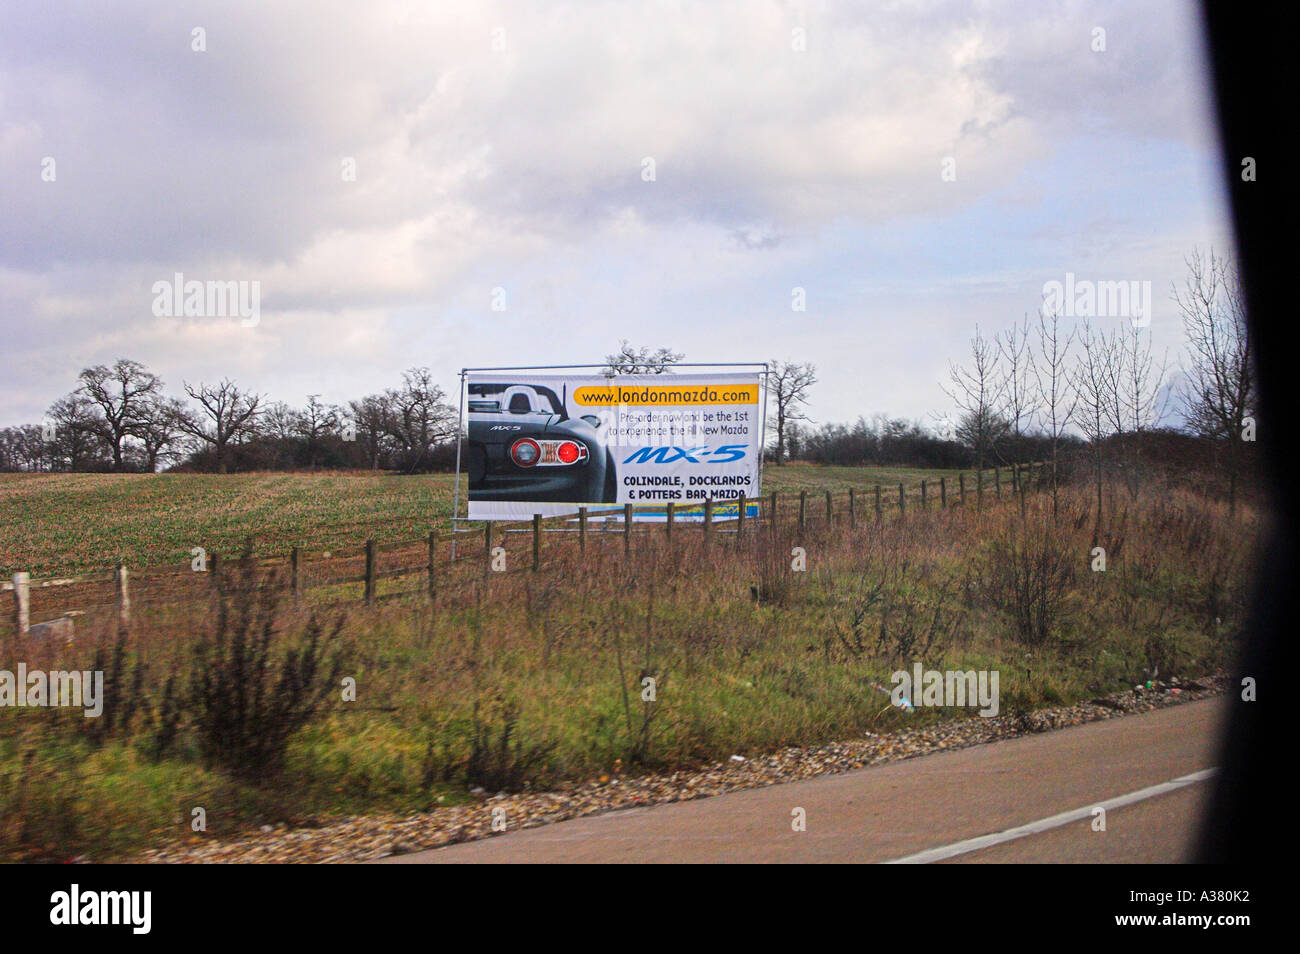 ROADSIDE ADVERTISING SIGNS Stock Photo